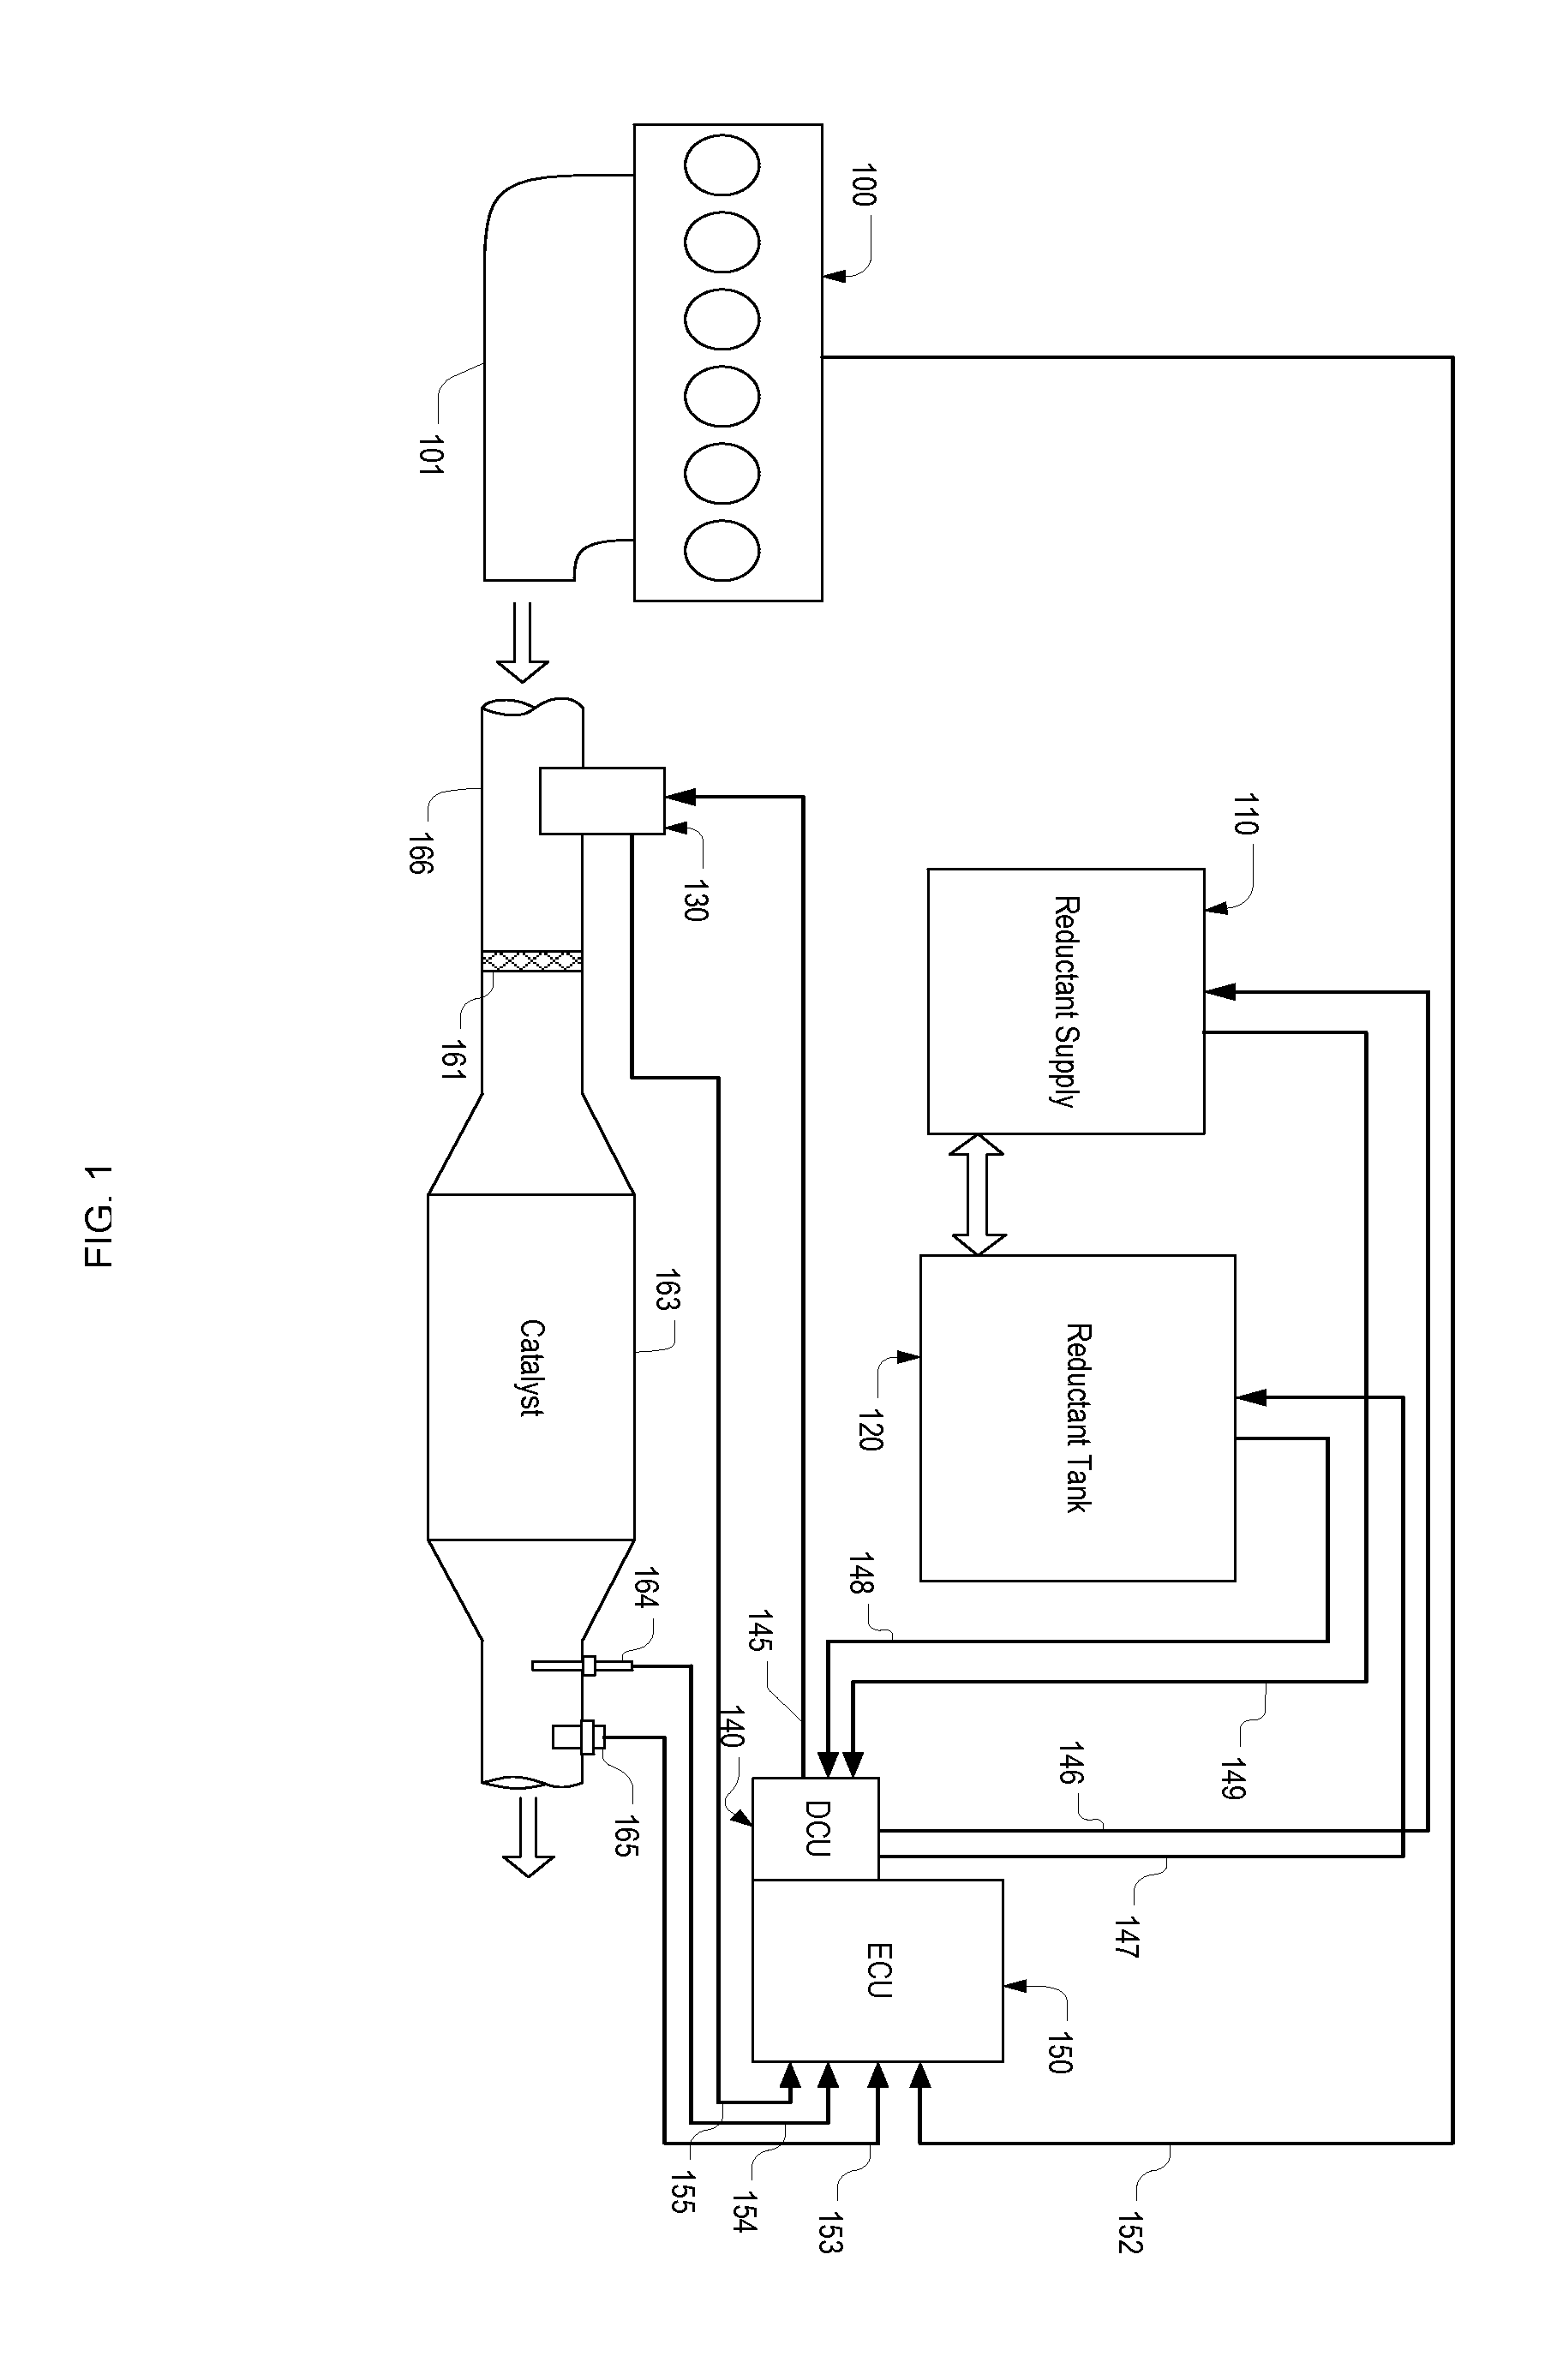 Fluid delivery apparatus with flow rate sensing means